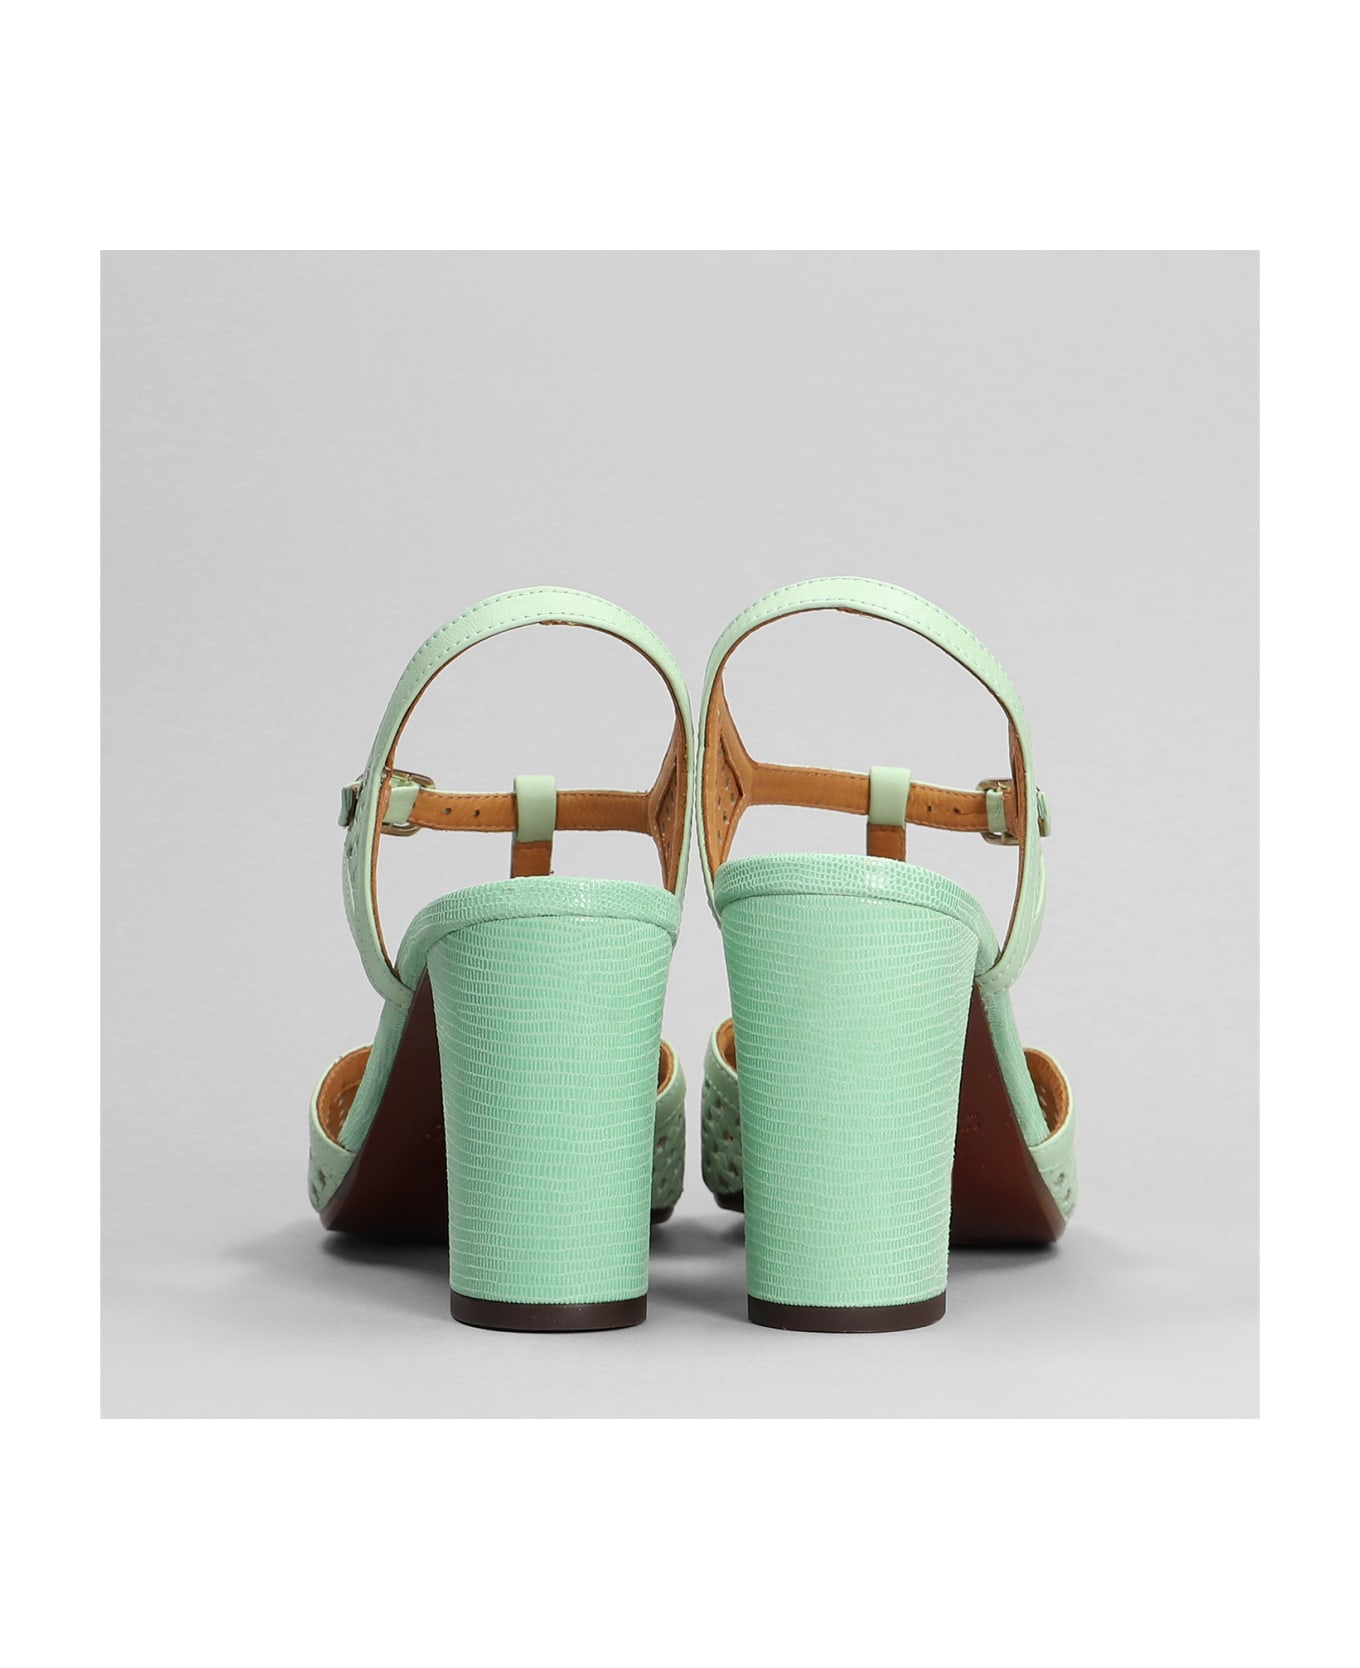 Chie Mihara Bessy Sandals In Green Leather - green